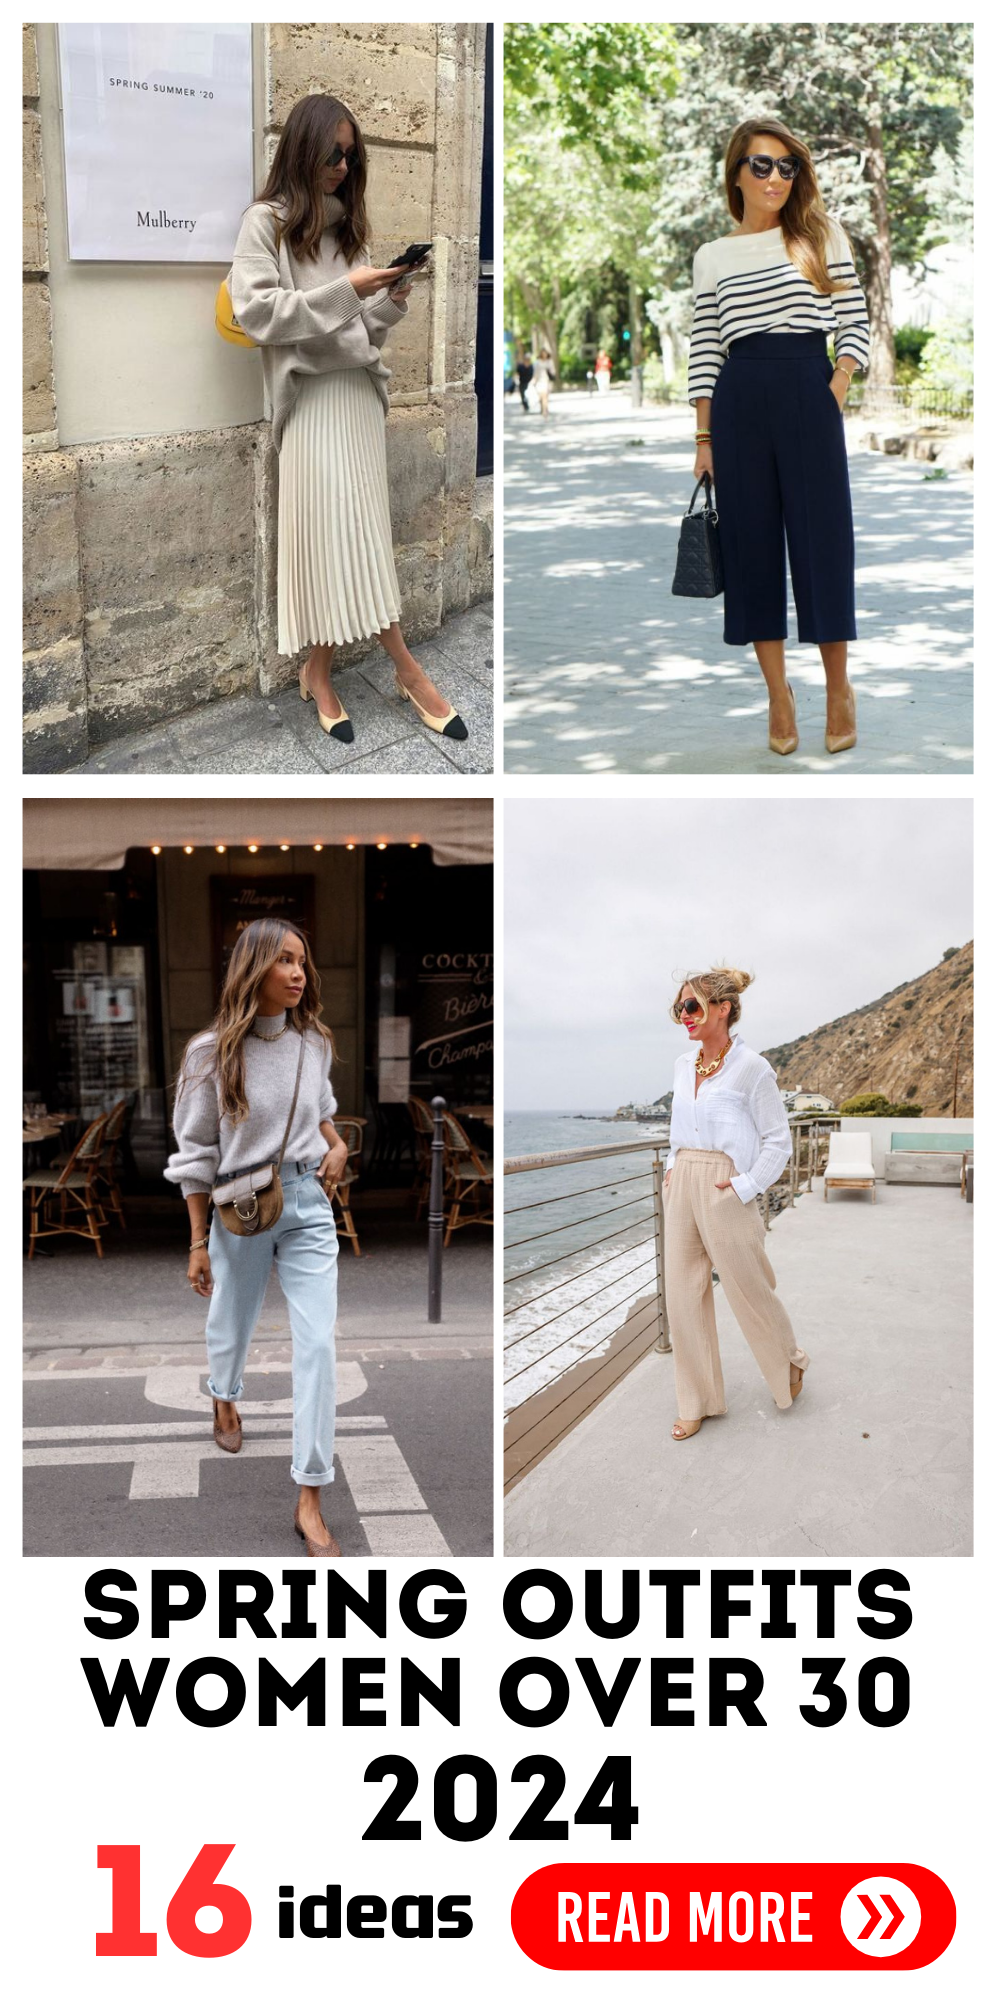 Styling & fashion tips for women over 30